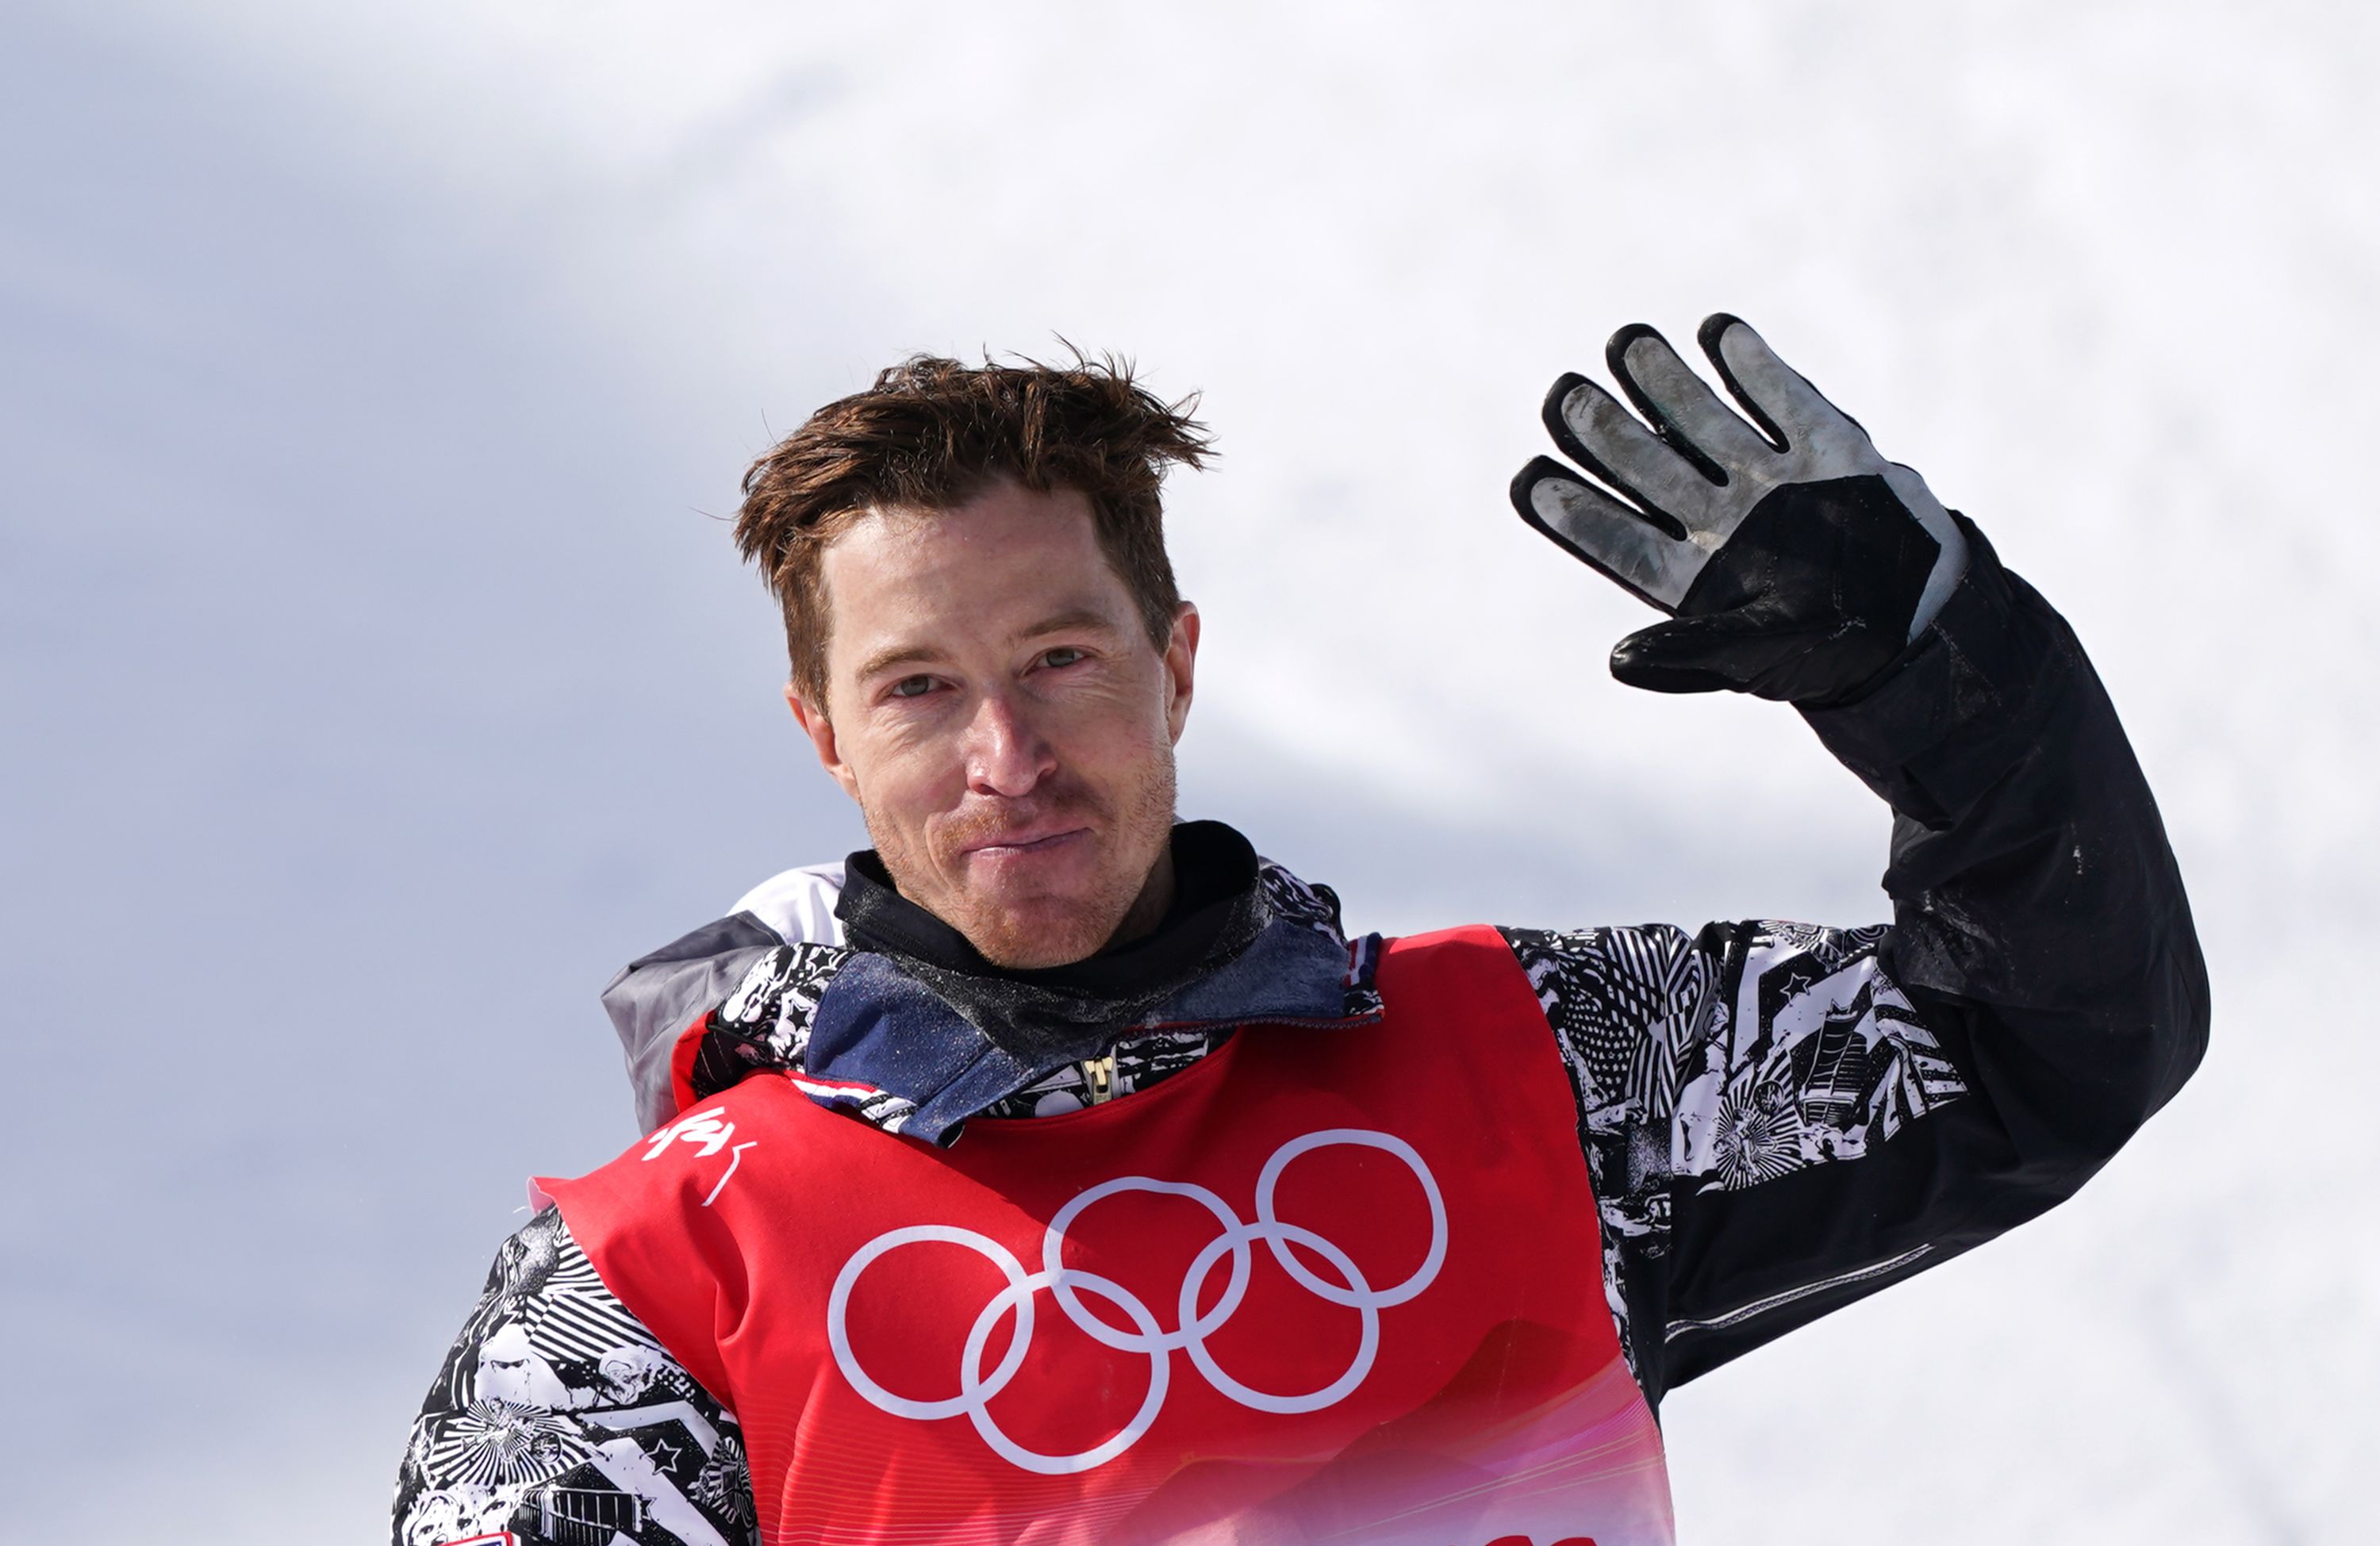 Shaun White Wins Halfpipe Gold at 2010 Olympics in Vancouver